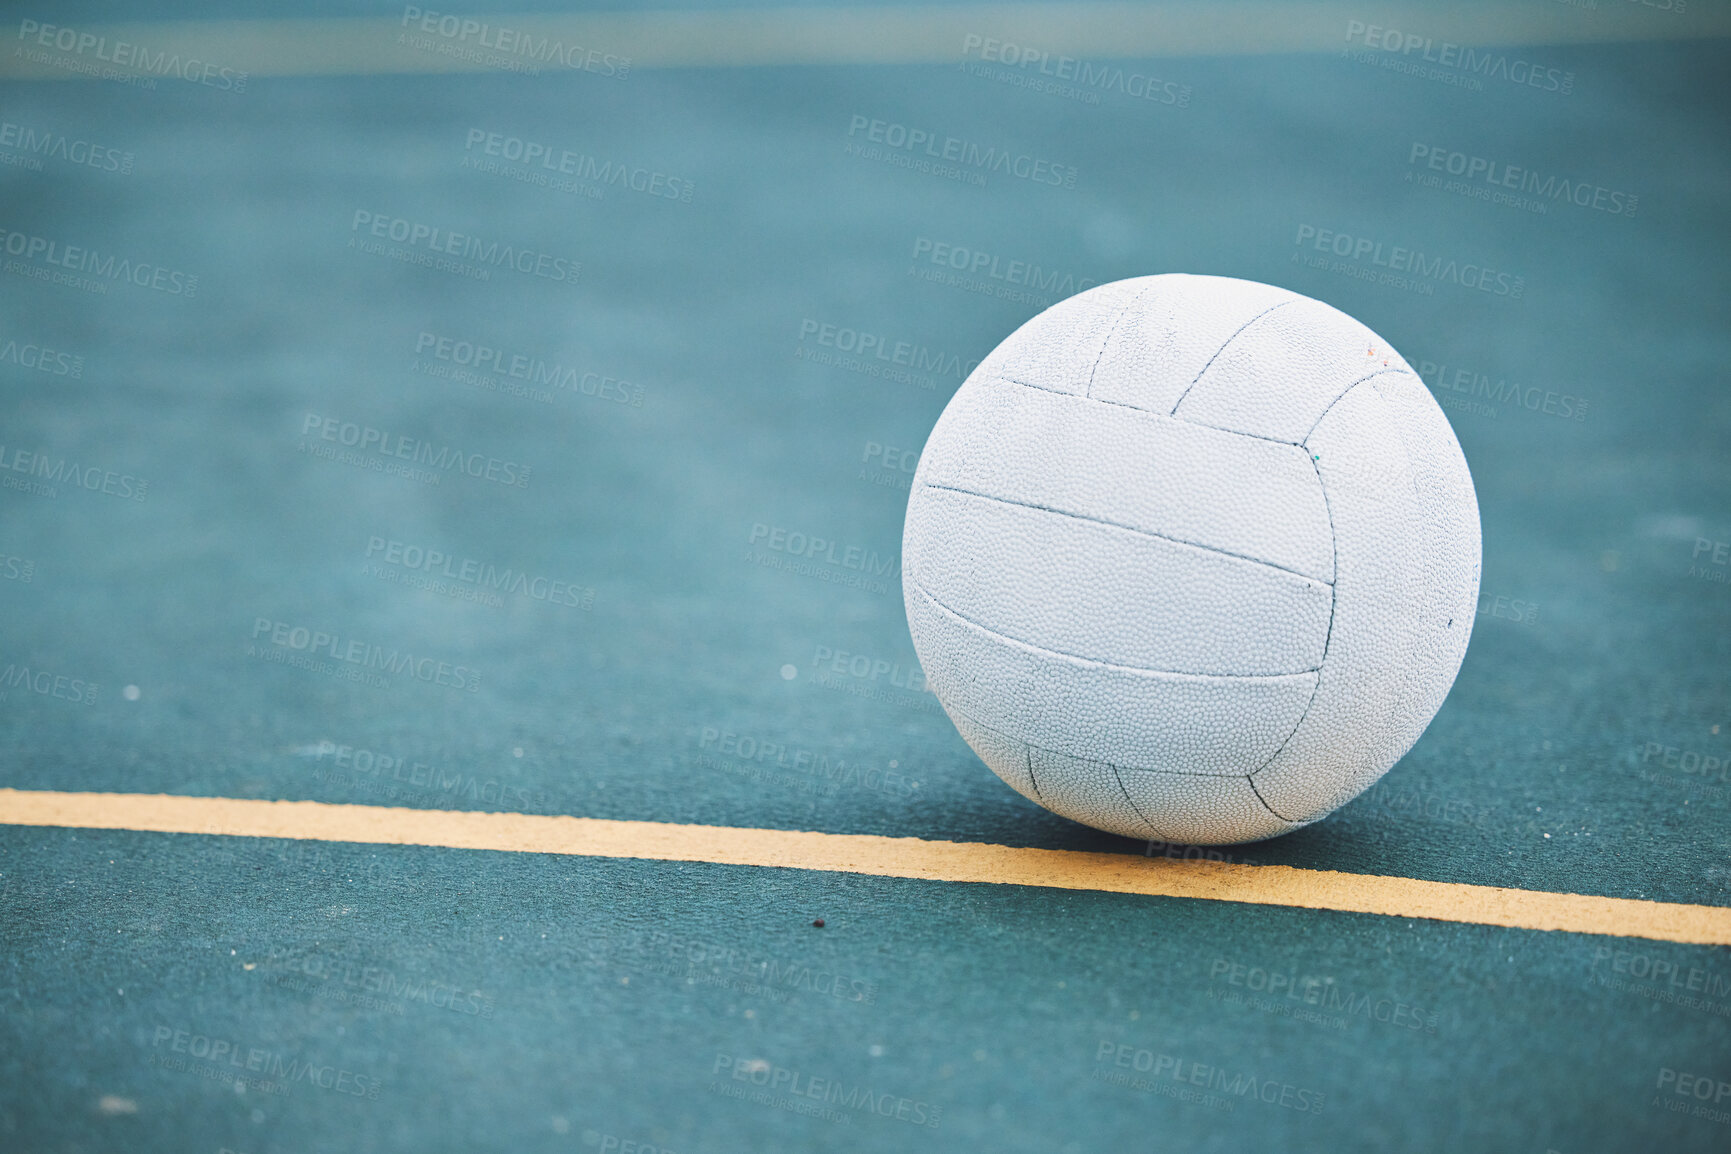 Buy stock photo Netball on the ground on a sports court for a match, training or exercise outdoor on a field. Sport, fitness and white ball on the floor for a game, workout or practice competition by a outside arena